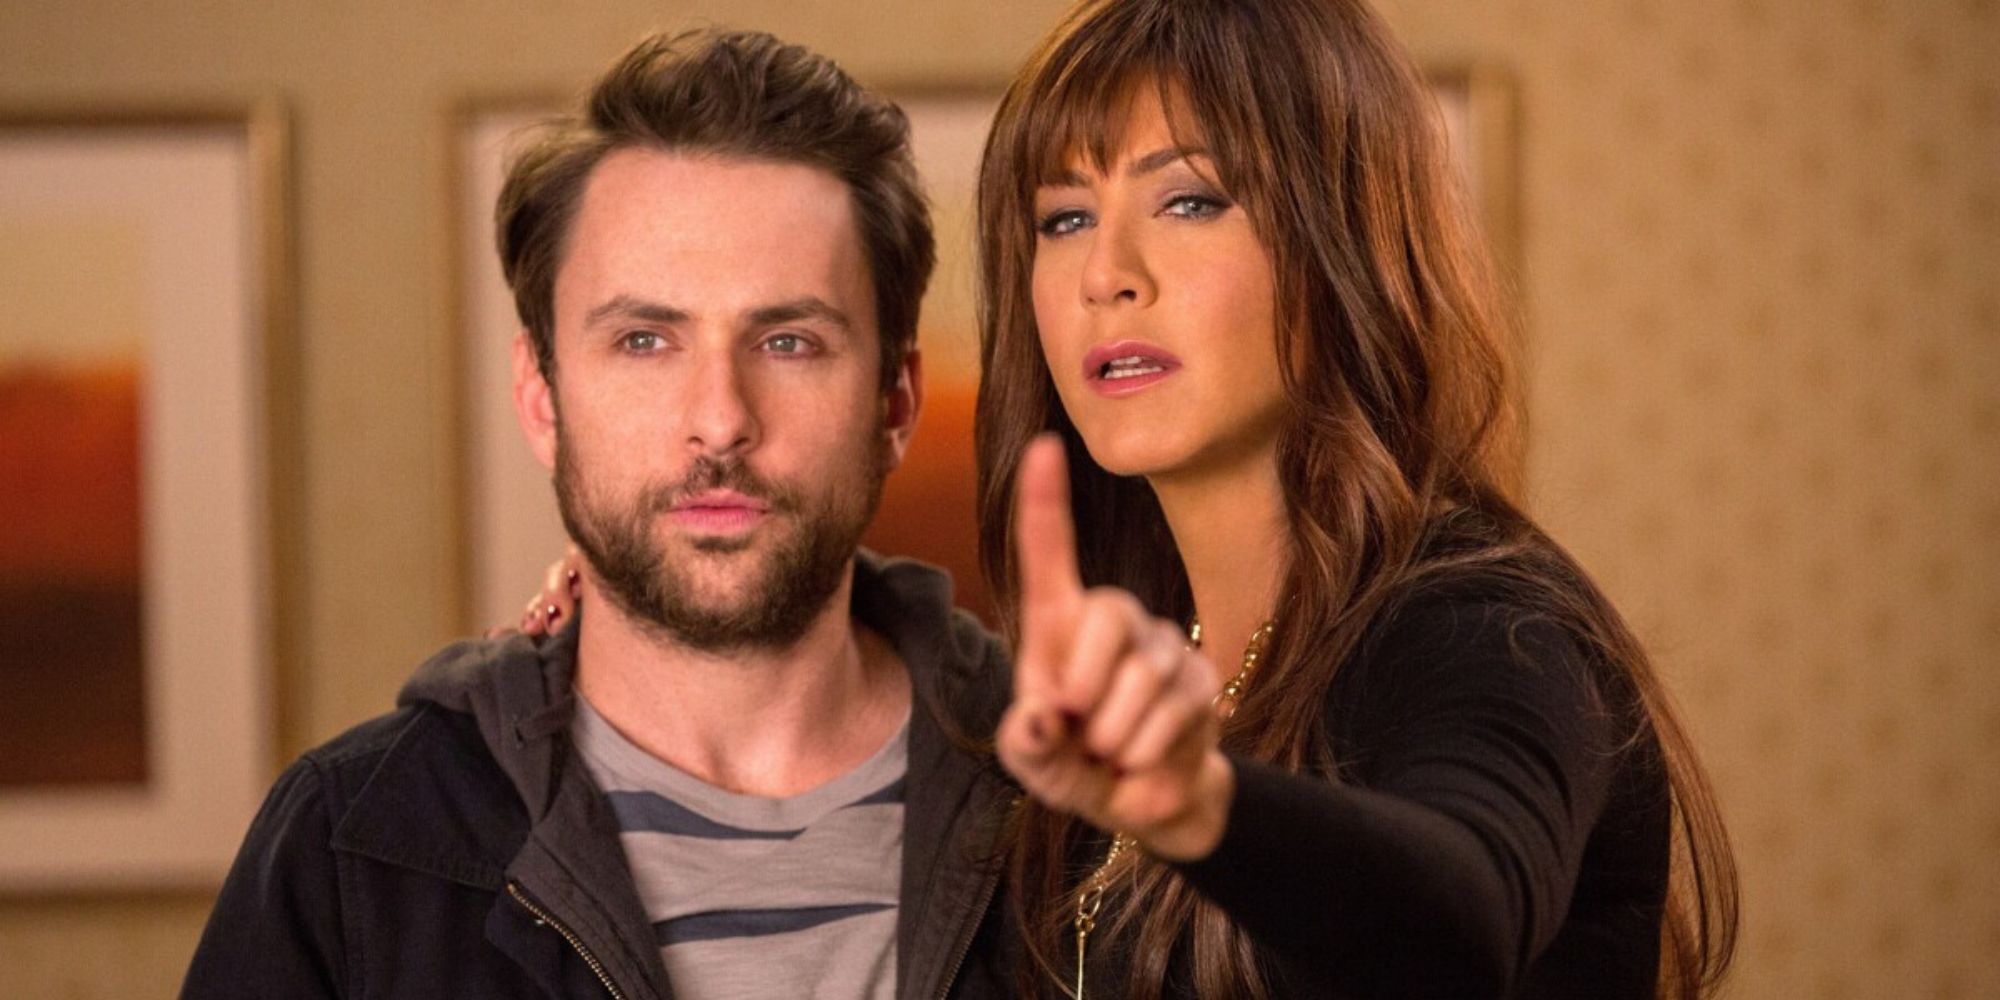 Dale and Julia from Horrible Bosses